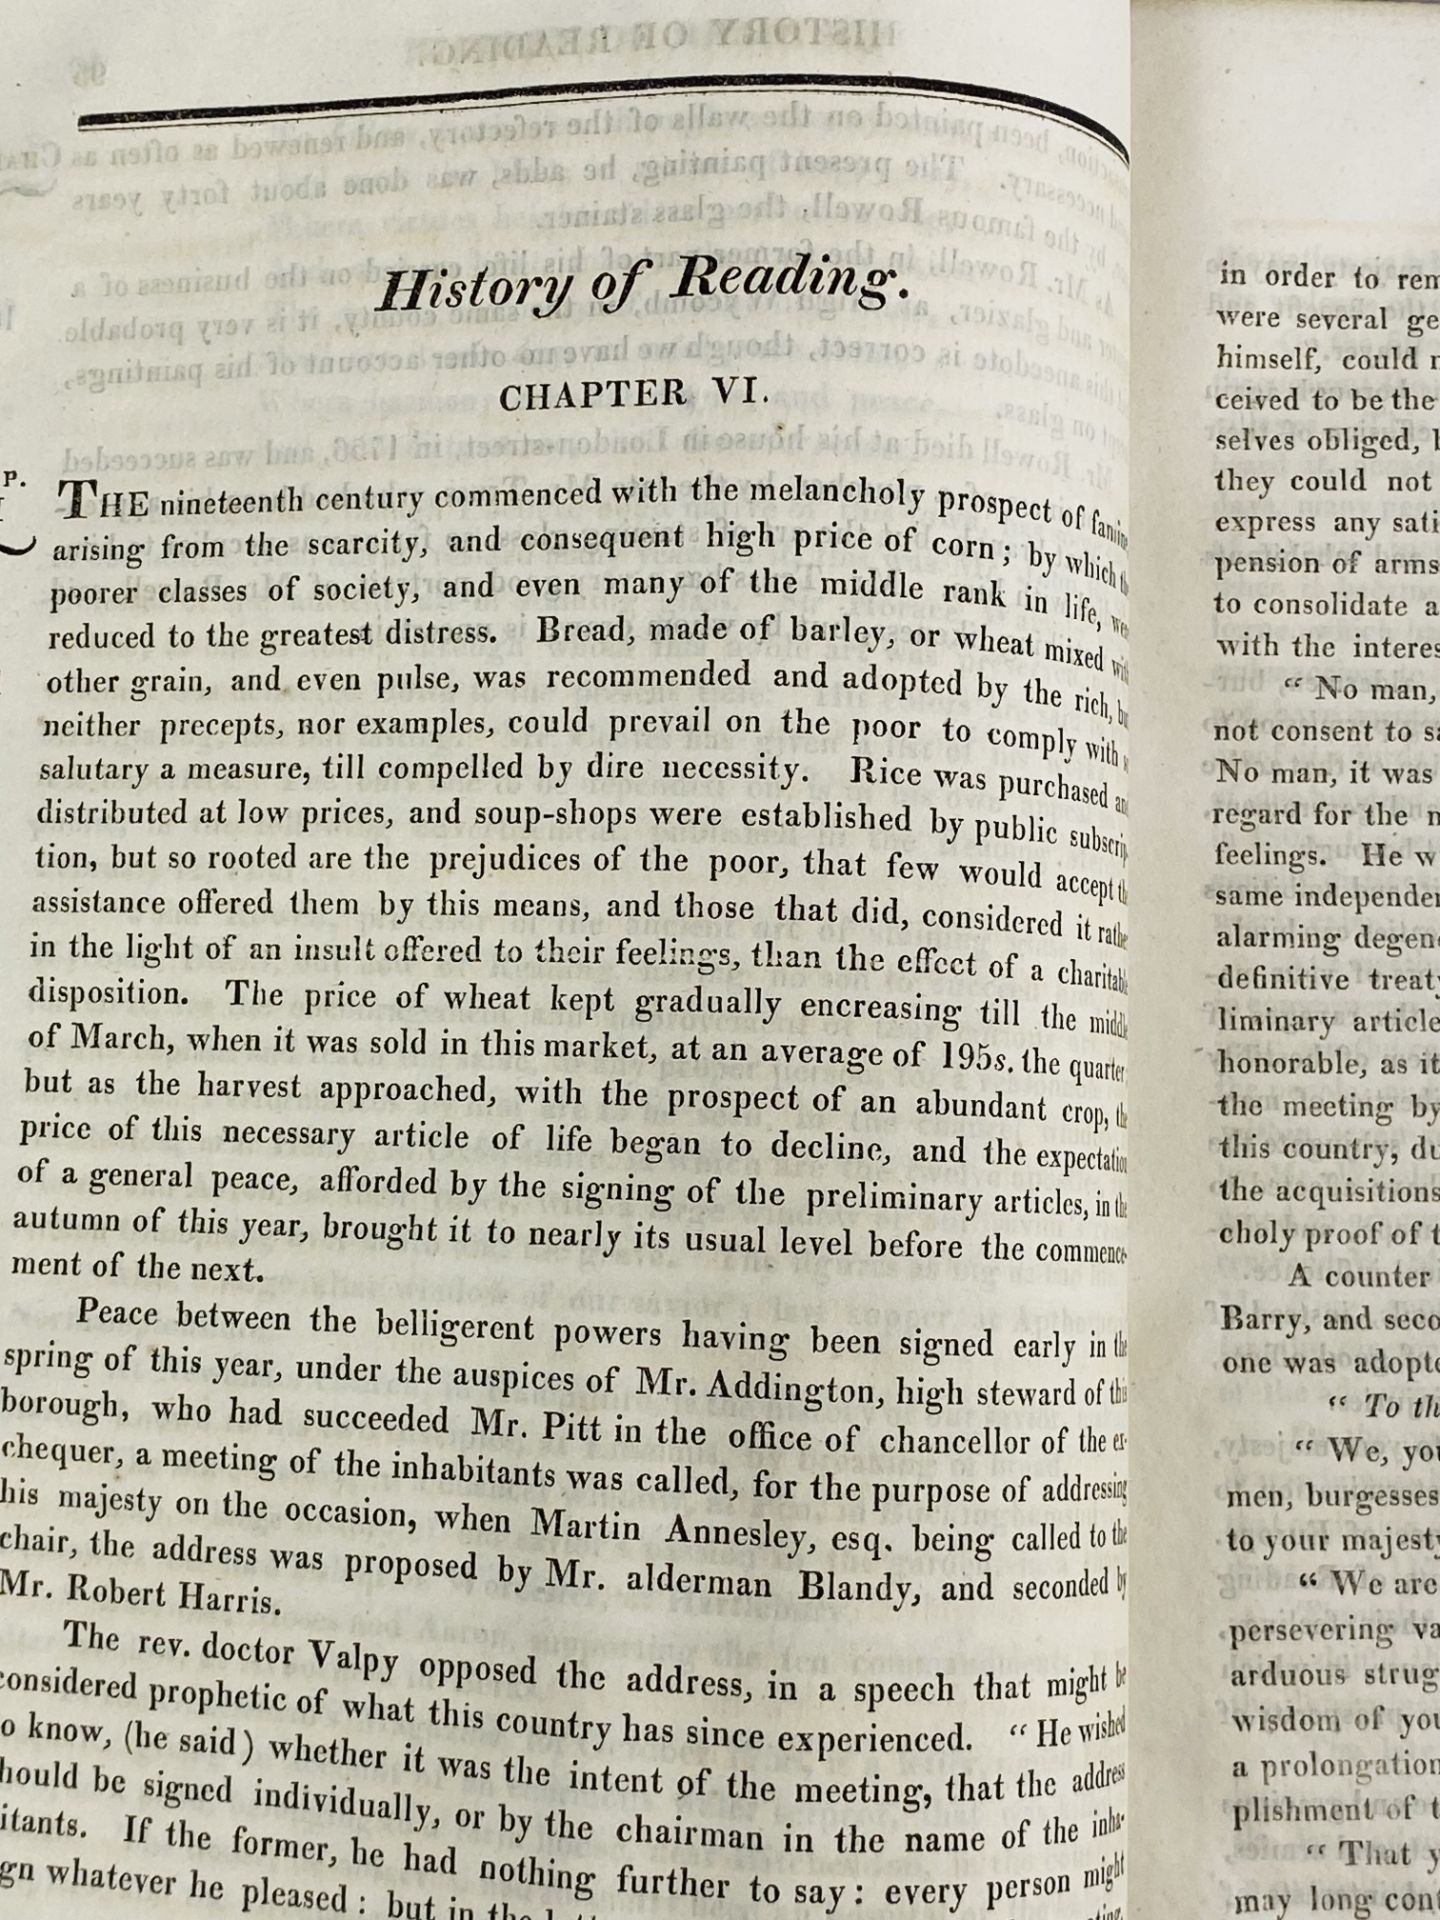 The History and Antiquities of the Borough of Reading by John Man, 1816 - Image 3 of 4